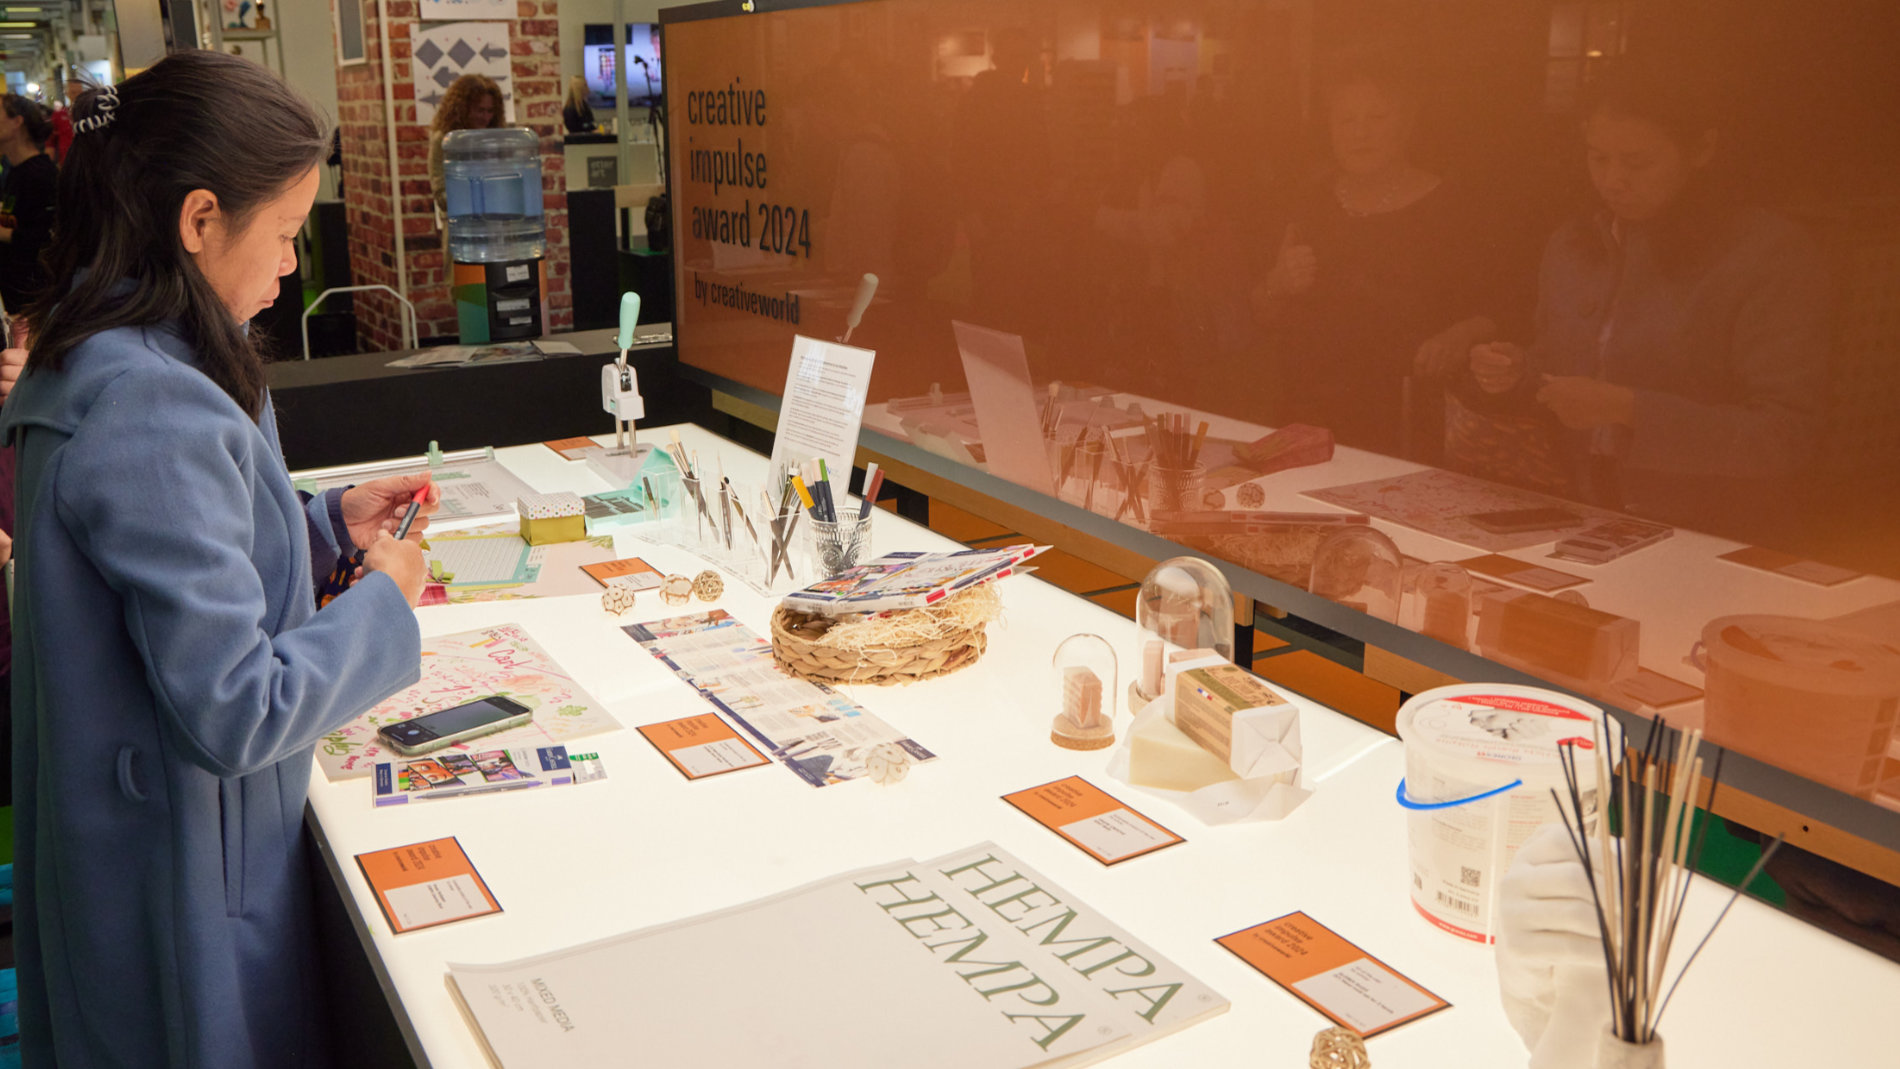 Winning products on the table at the Creative Impulse Award